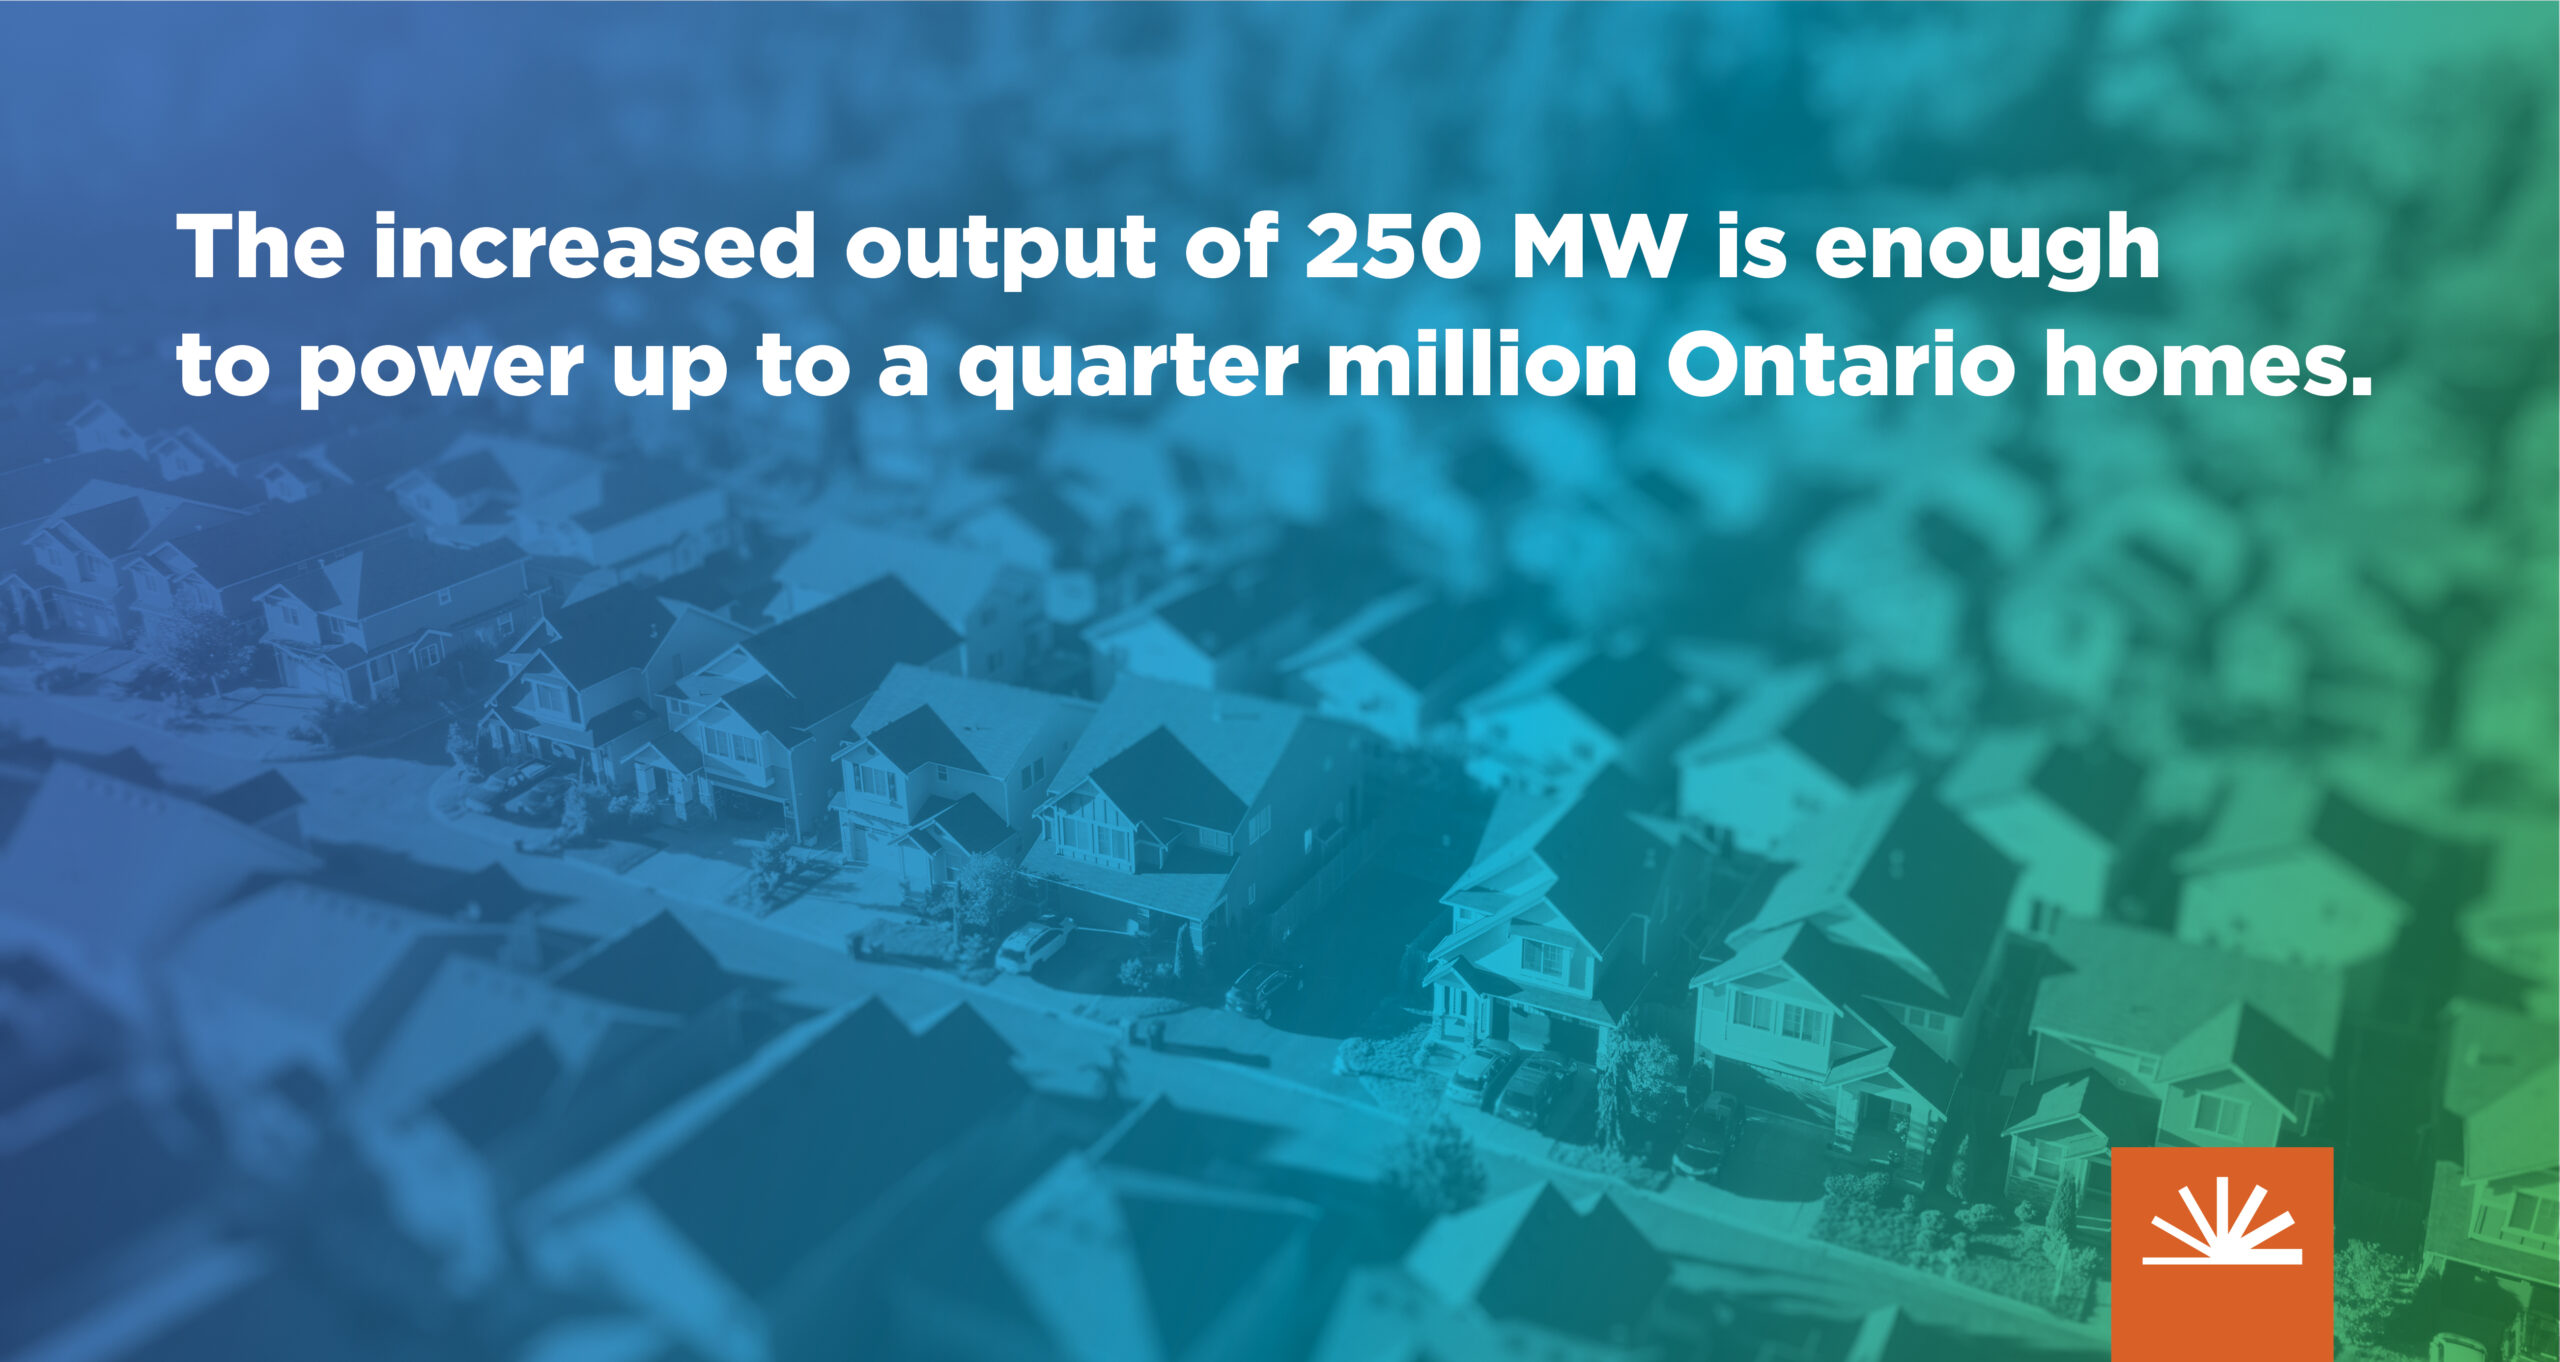 'The increased output of 250 MW is enough to power up to a quarter million Ontario homes